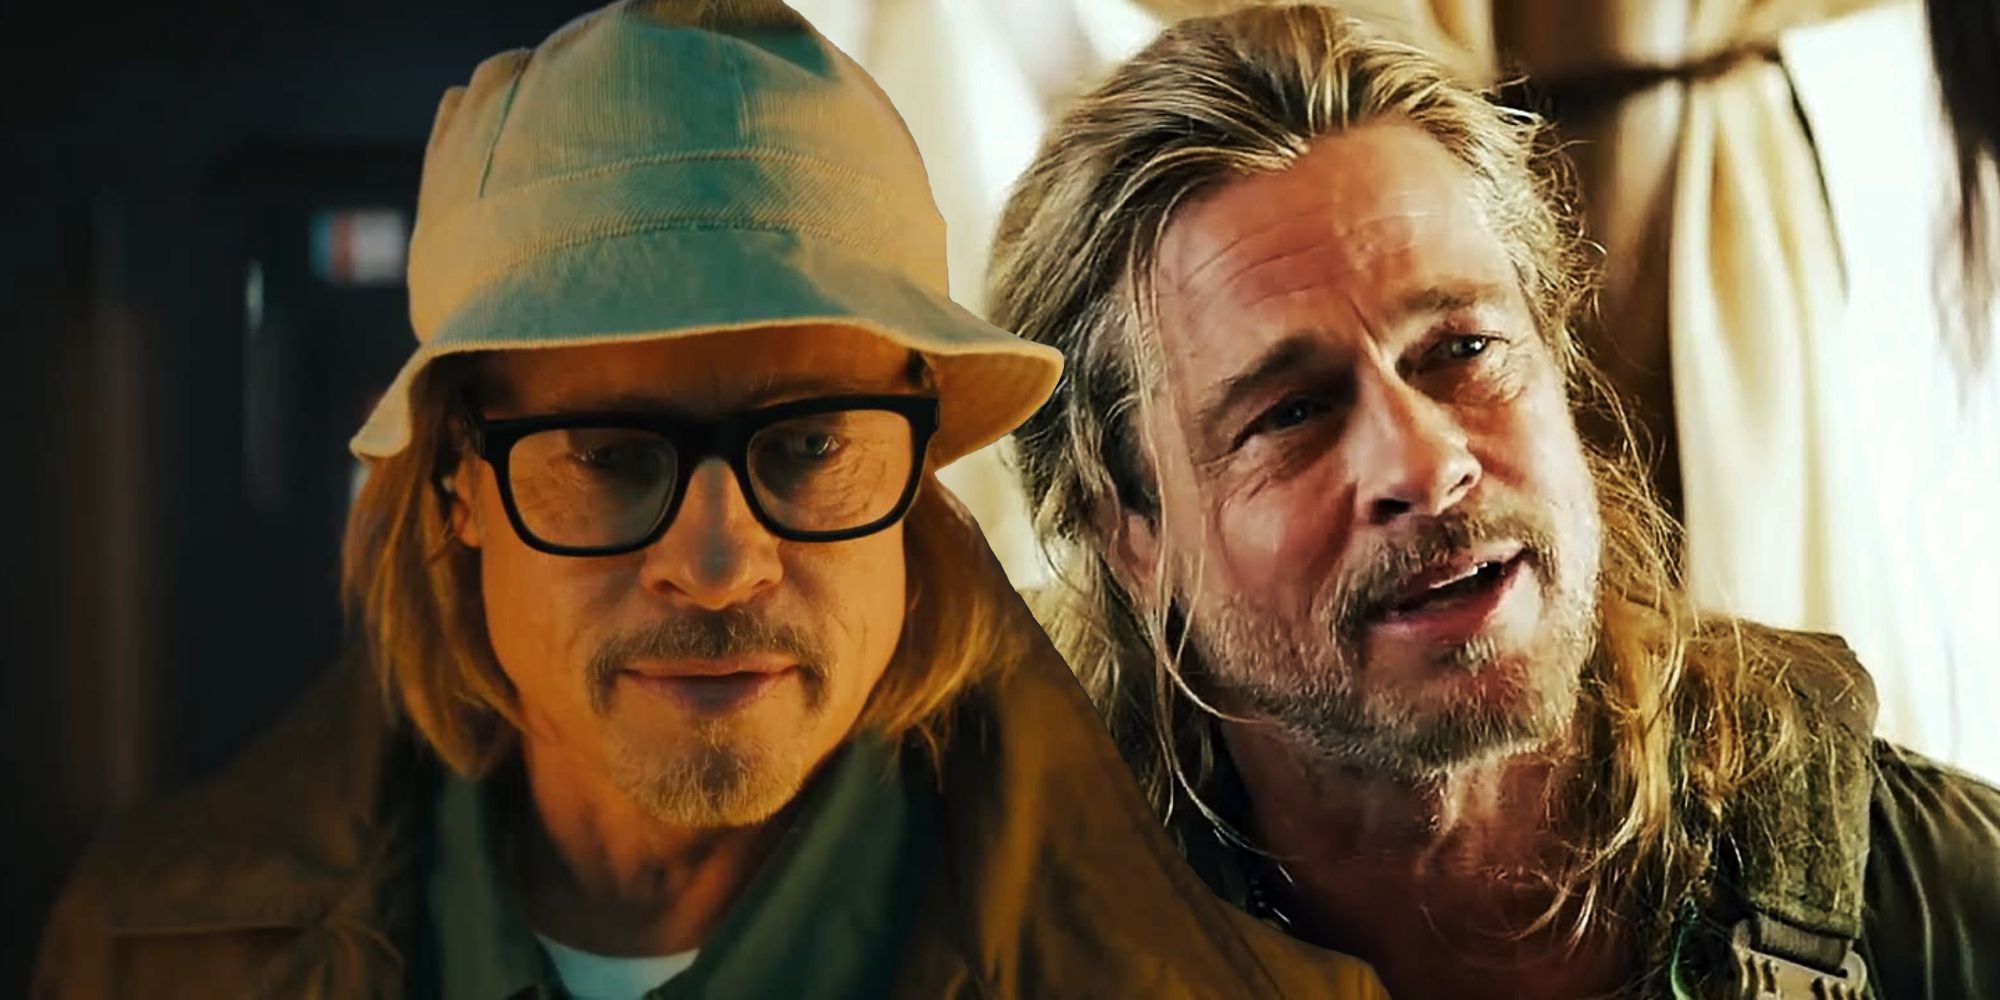 Brad Pitt's 2022 Movies - Bullet Train and The Lost City